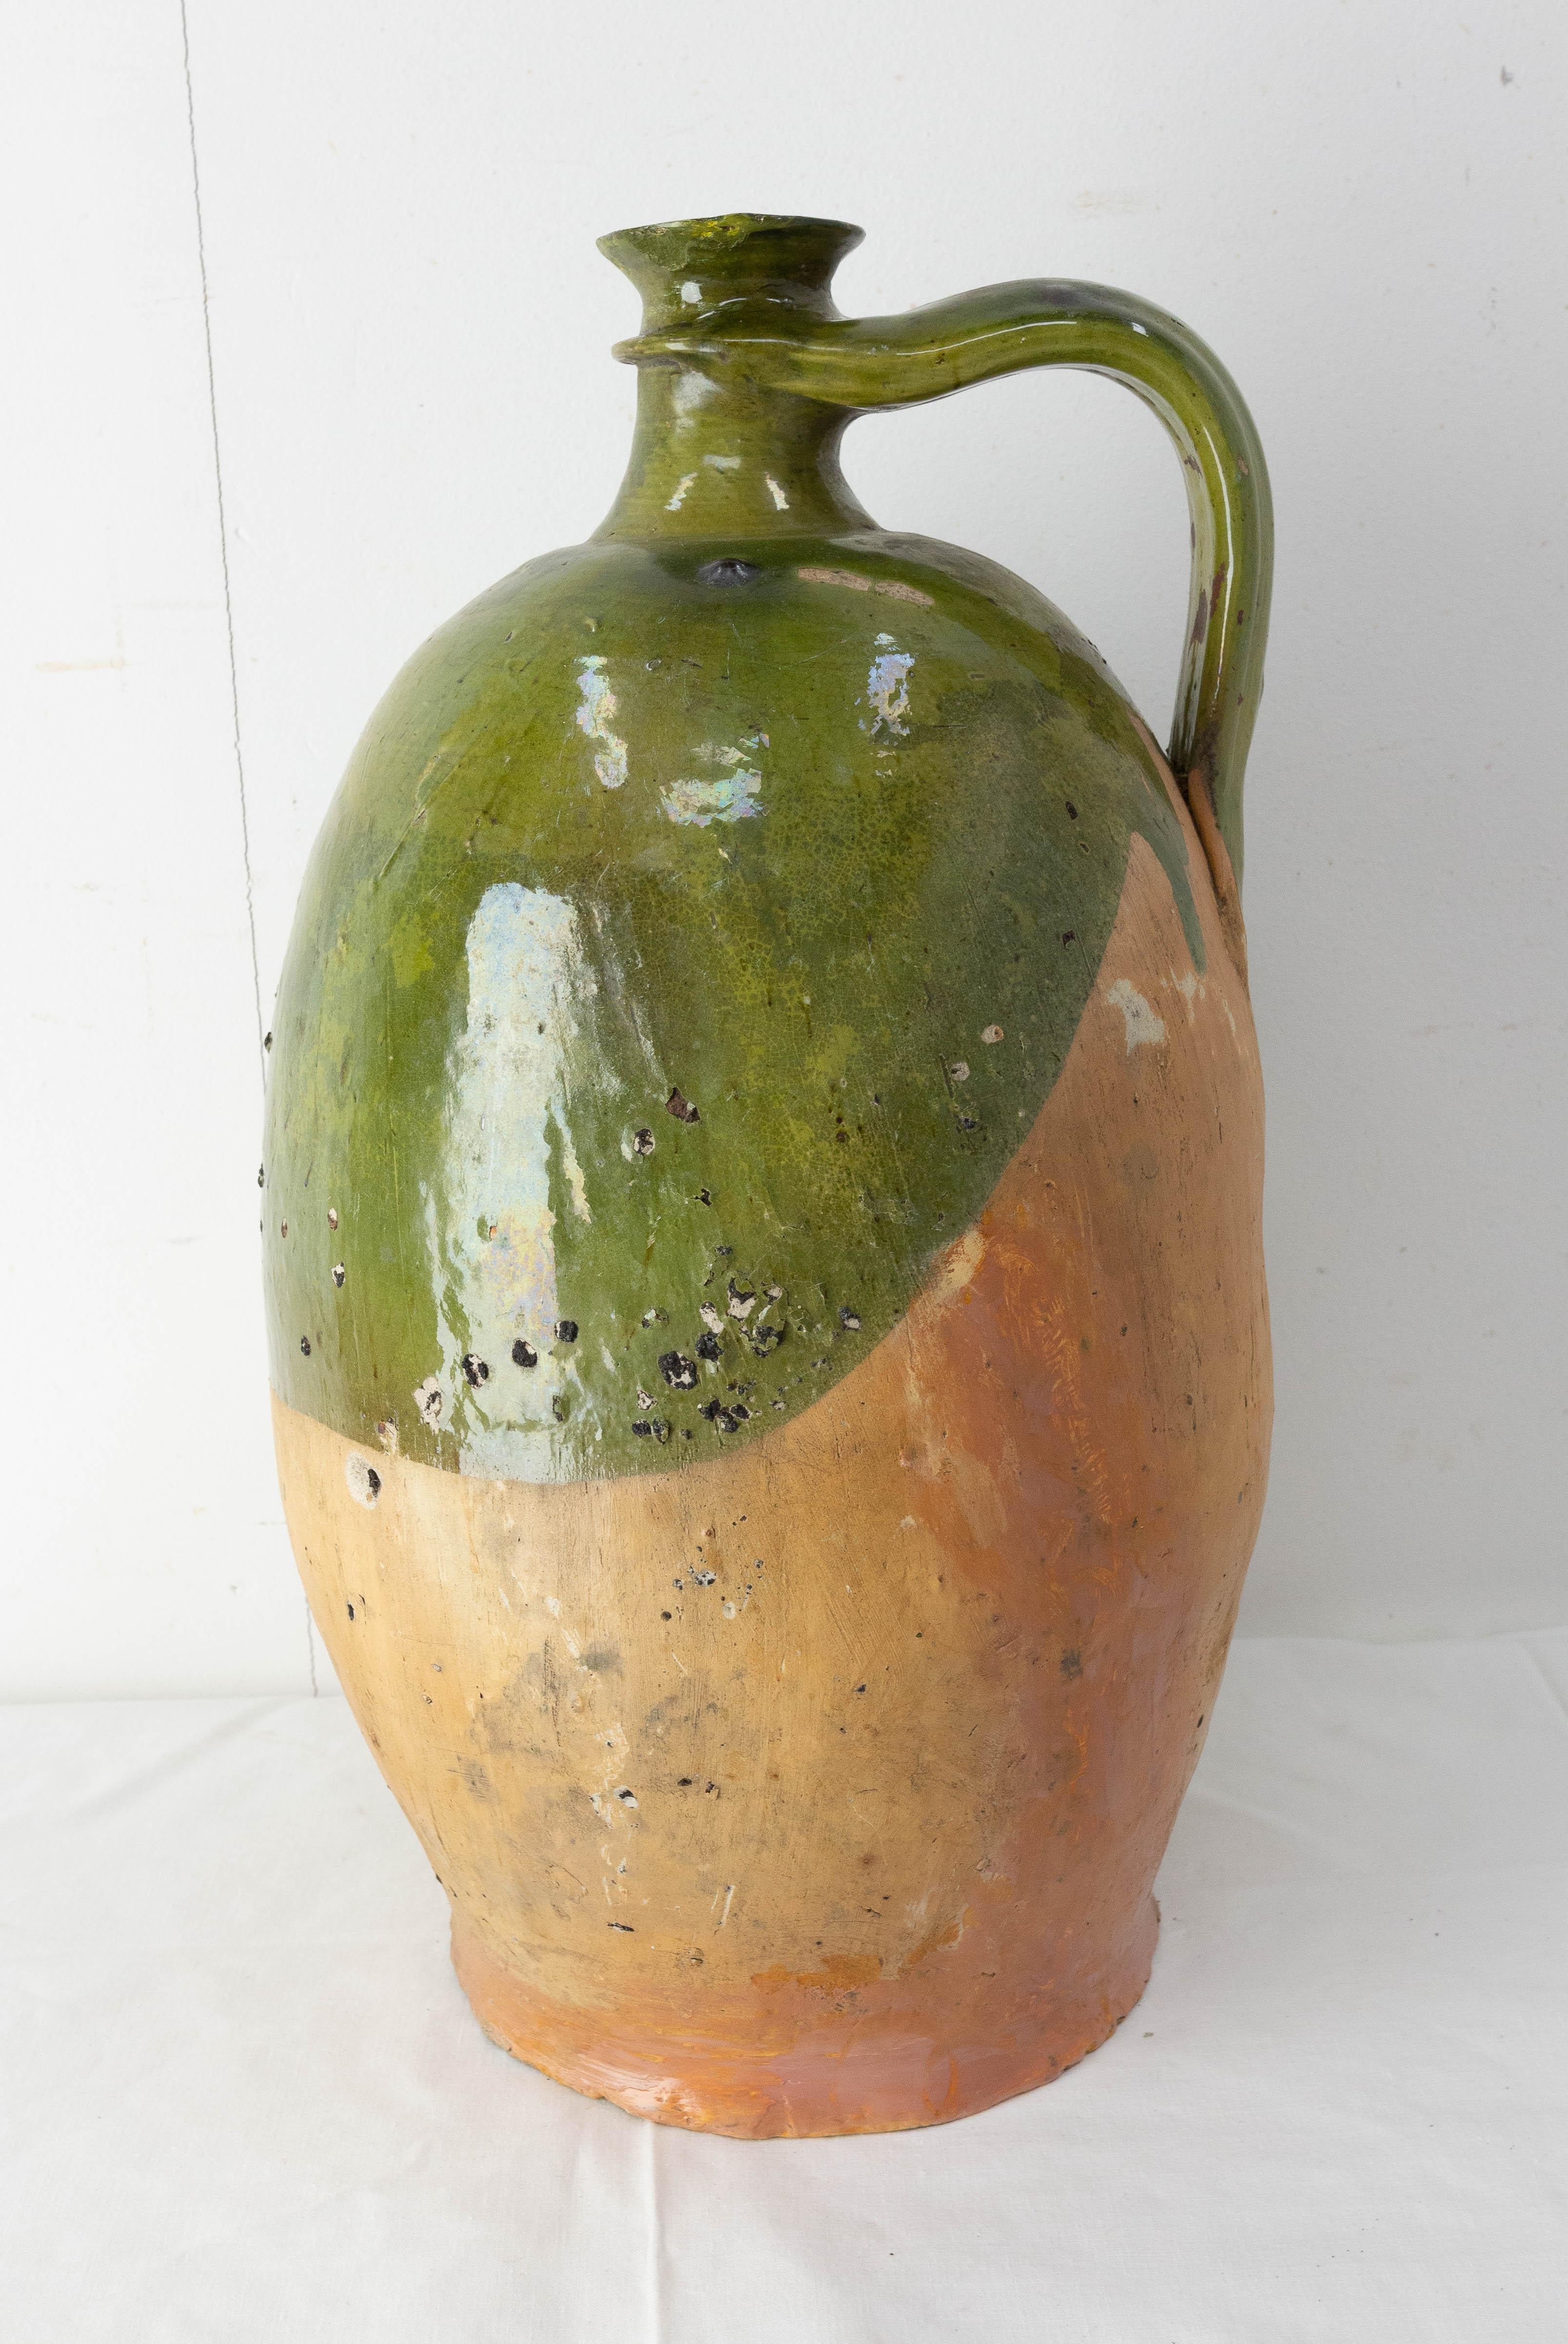 Terracotta jar with green glaze. This kind of pitcher was used to retain oil.
Typical of those objects of the French provincial life of past centuries where it was necessary to have suitable conservation solutions for each food.
The authenticity